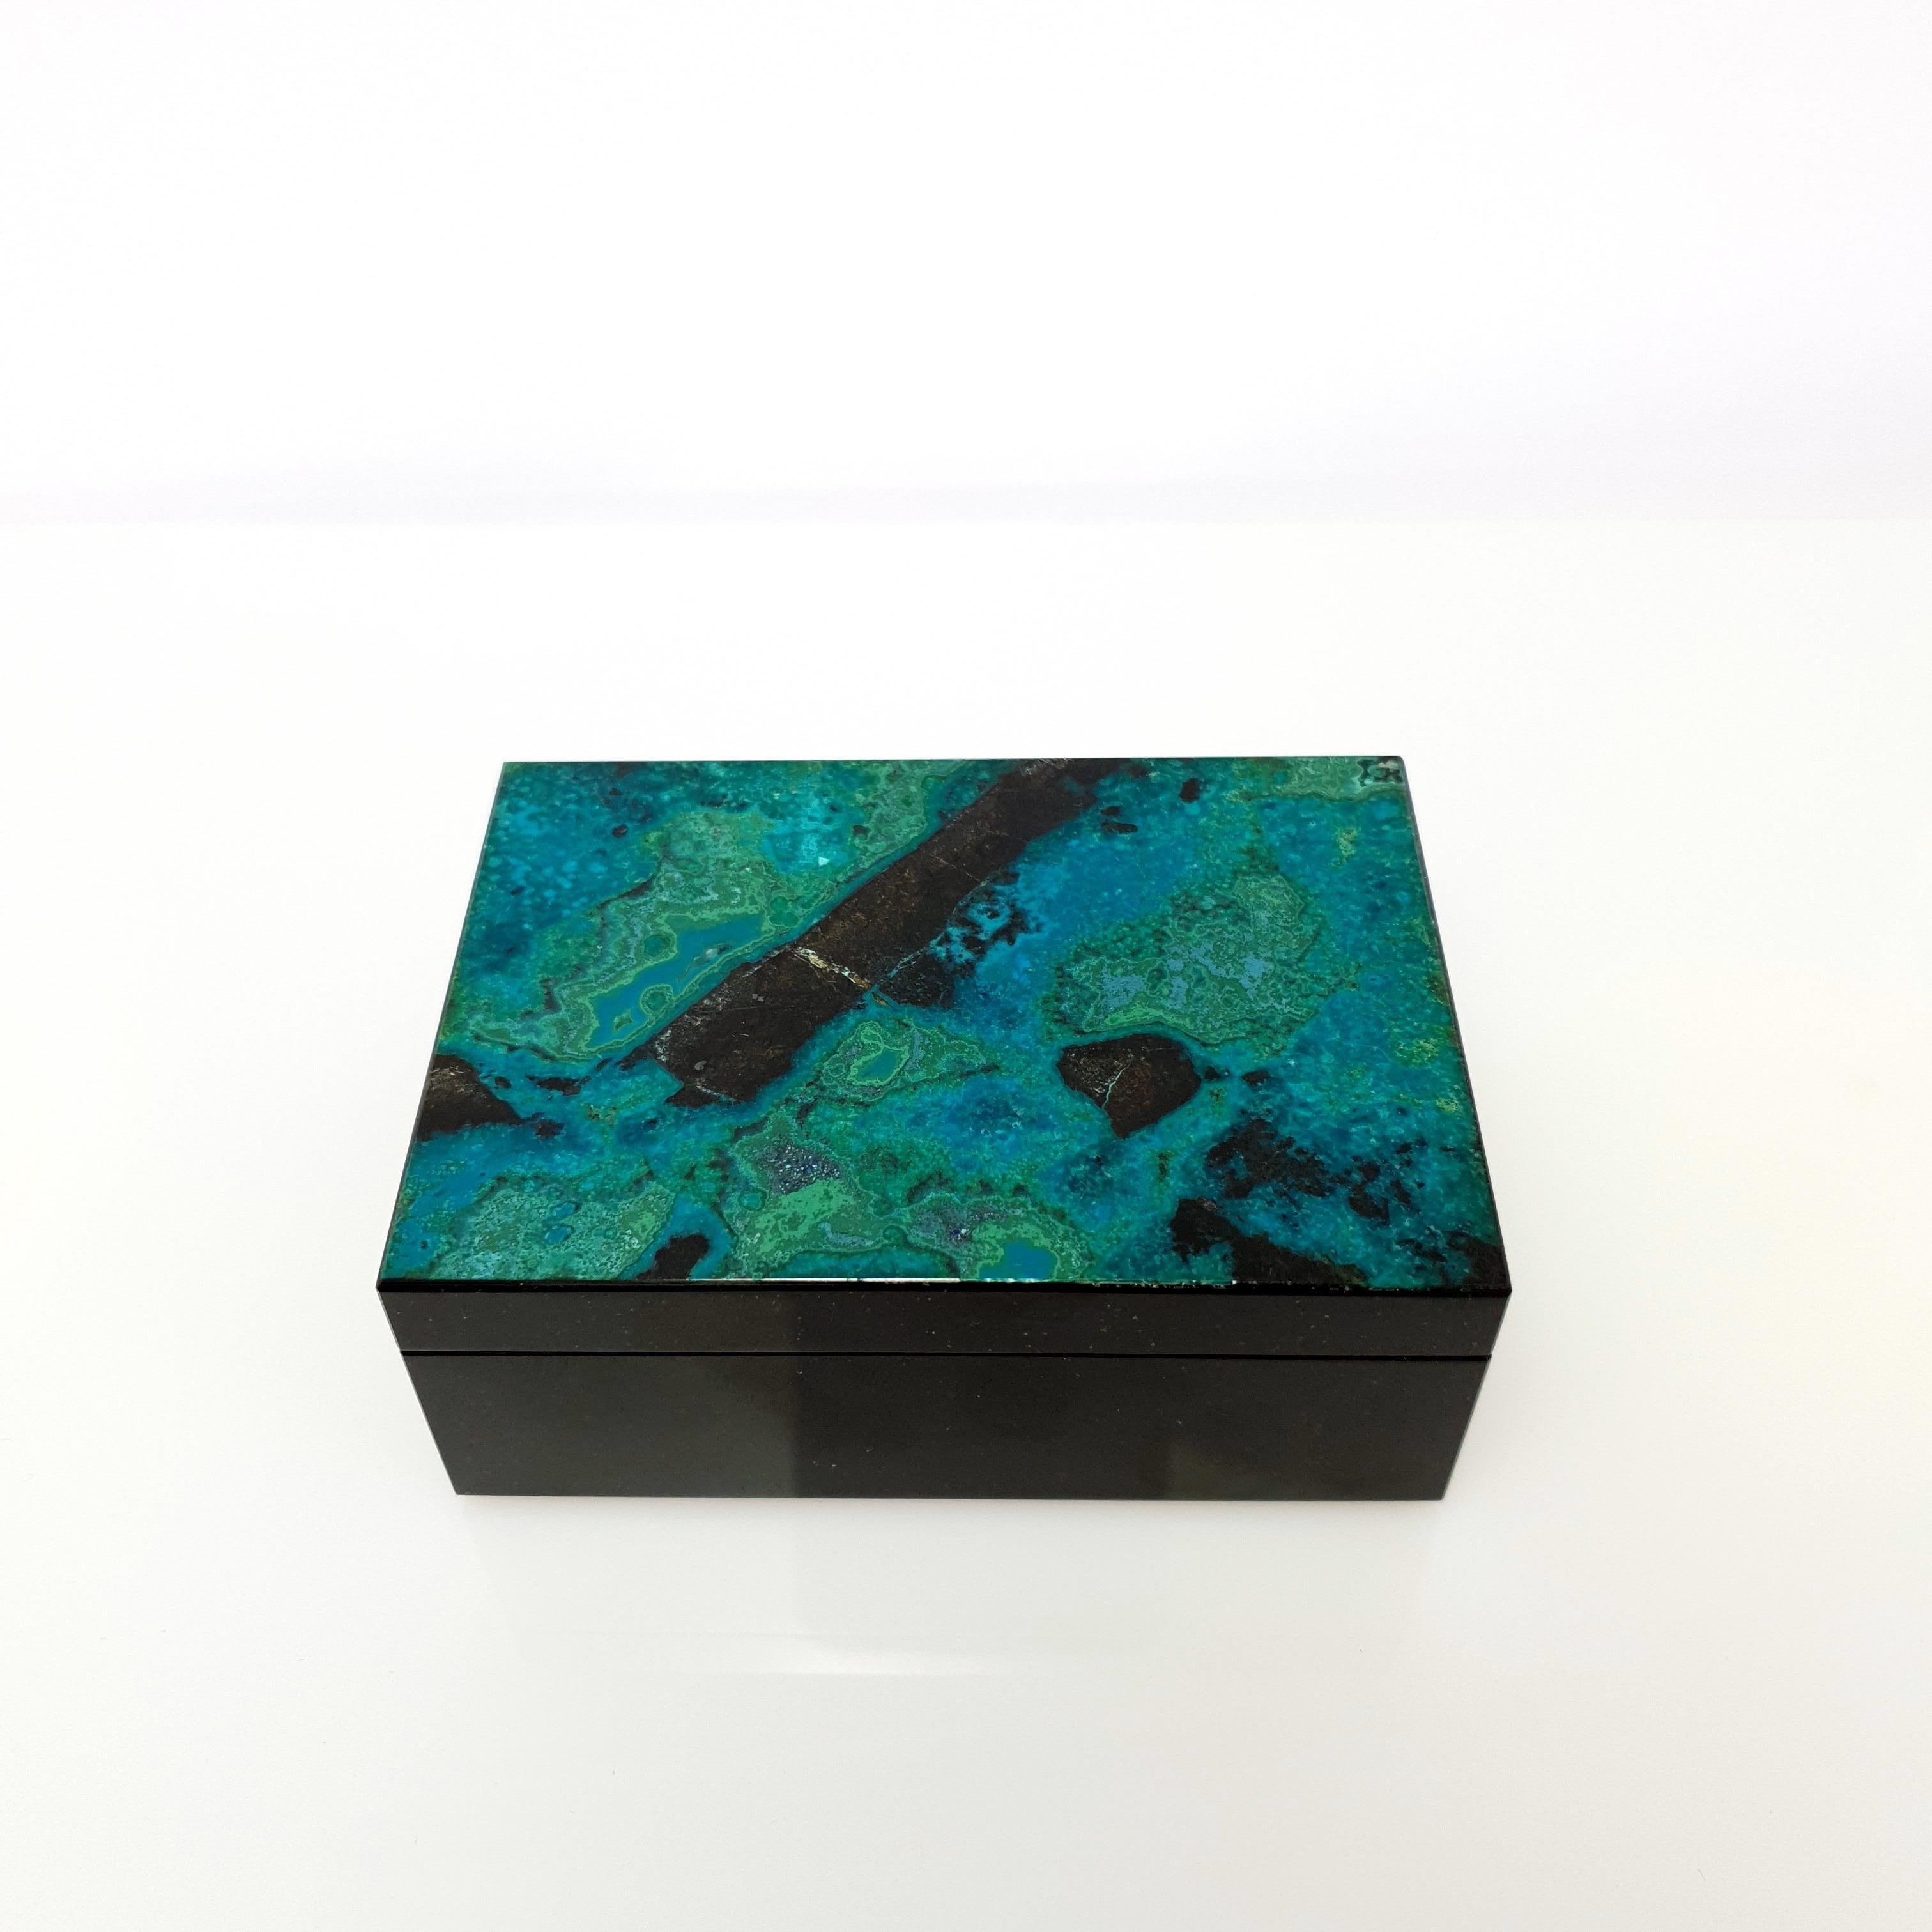 A handmade Natural Blue Green Chrysokoll & Malachite decorative Jewelery Box.
The pattern looks like an artful painting of nature.
It should be emphasized that the top plate is made from one piece and not composed of many mosaics .
The Inlay is made